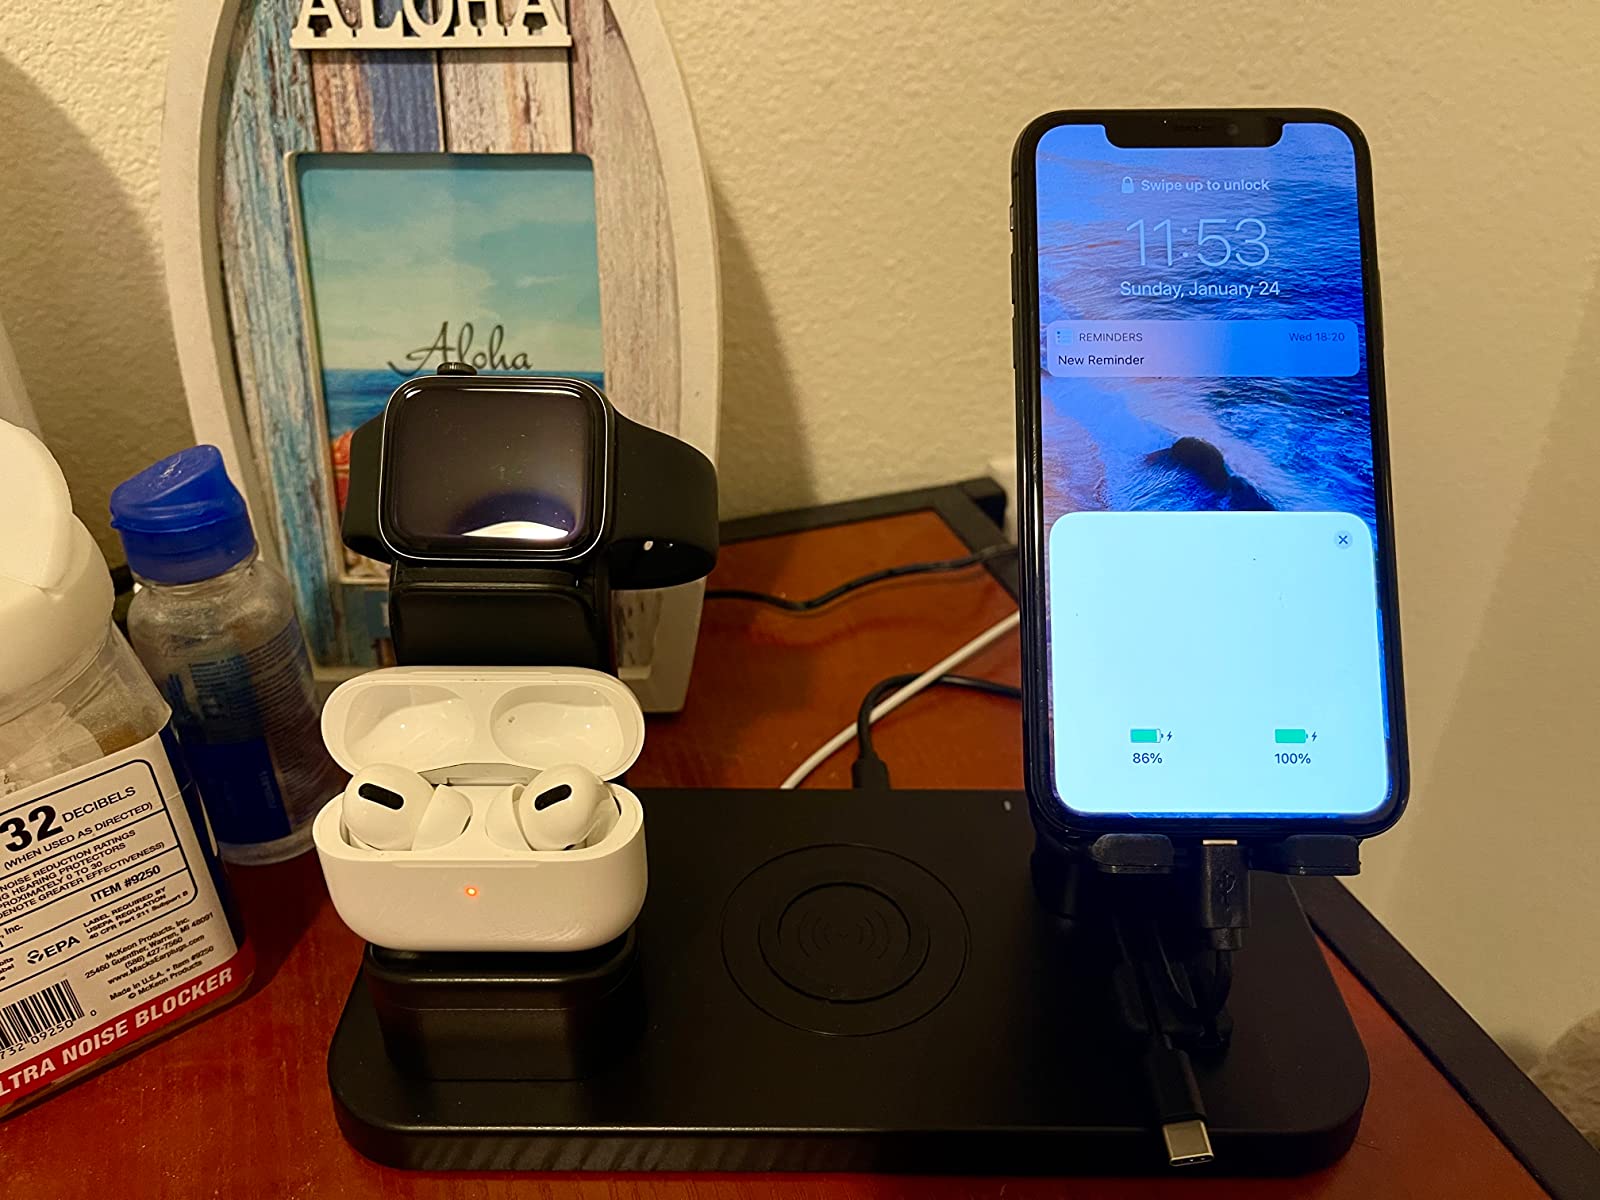 Wireless 4 In 1 Charging Station | Smart Charger Dock photo review